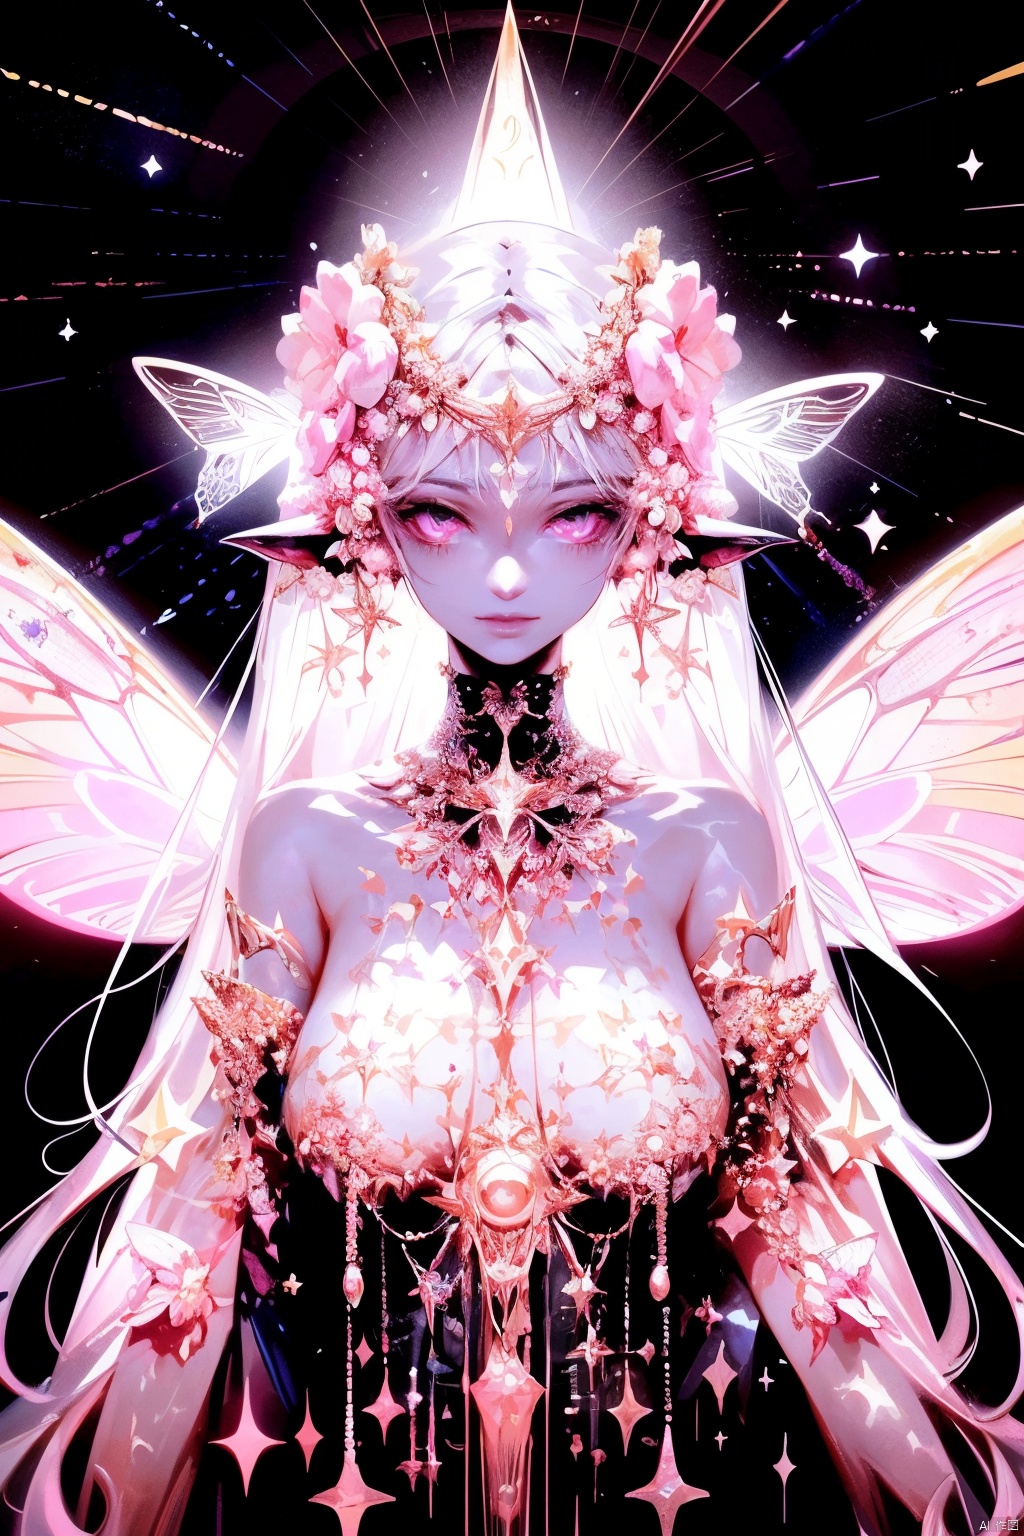 a close up of a person with a butterfly on a black background, astral fairy, glowing angelic being, psychedelic goddess, space flower fairy, wearing psychedelic wicca, magical being, cosmic goddess, cosmic horror entity with wings, astral appearance, ethereal angelic being of light, magical fairy floating in space, some cosmic angels, celestial goddess, jen bartel, techno mystic goddess